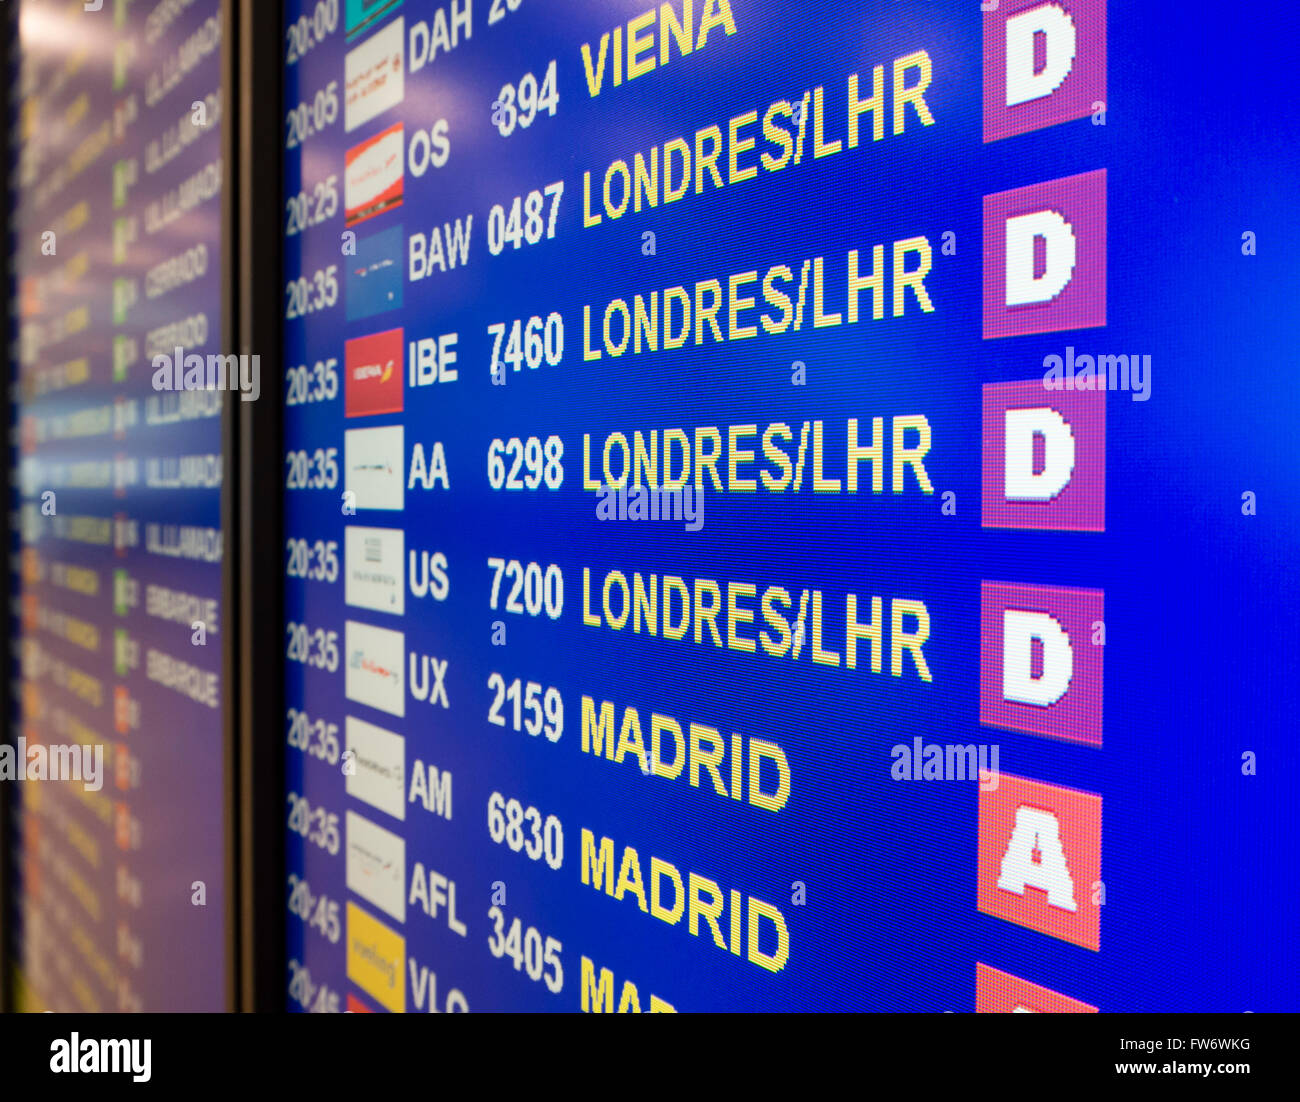 Electronic annunciator panel at an airport showing flights to London and Madrid ready for boarding Stock Photo